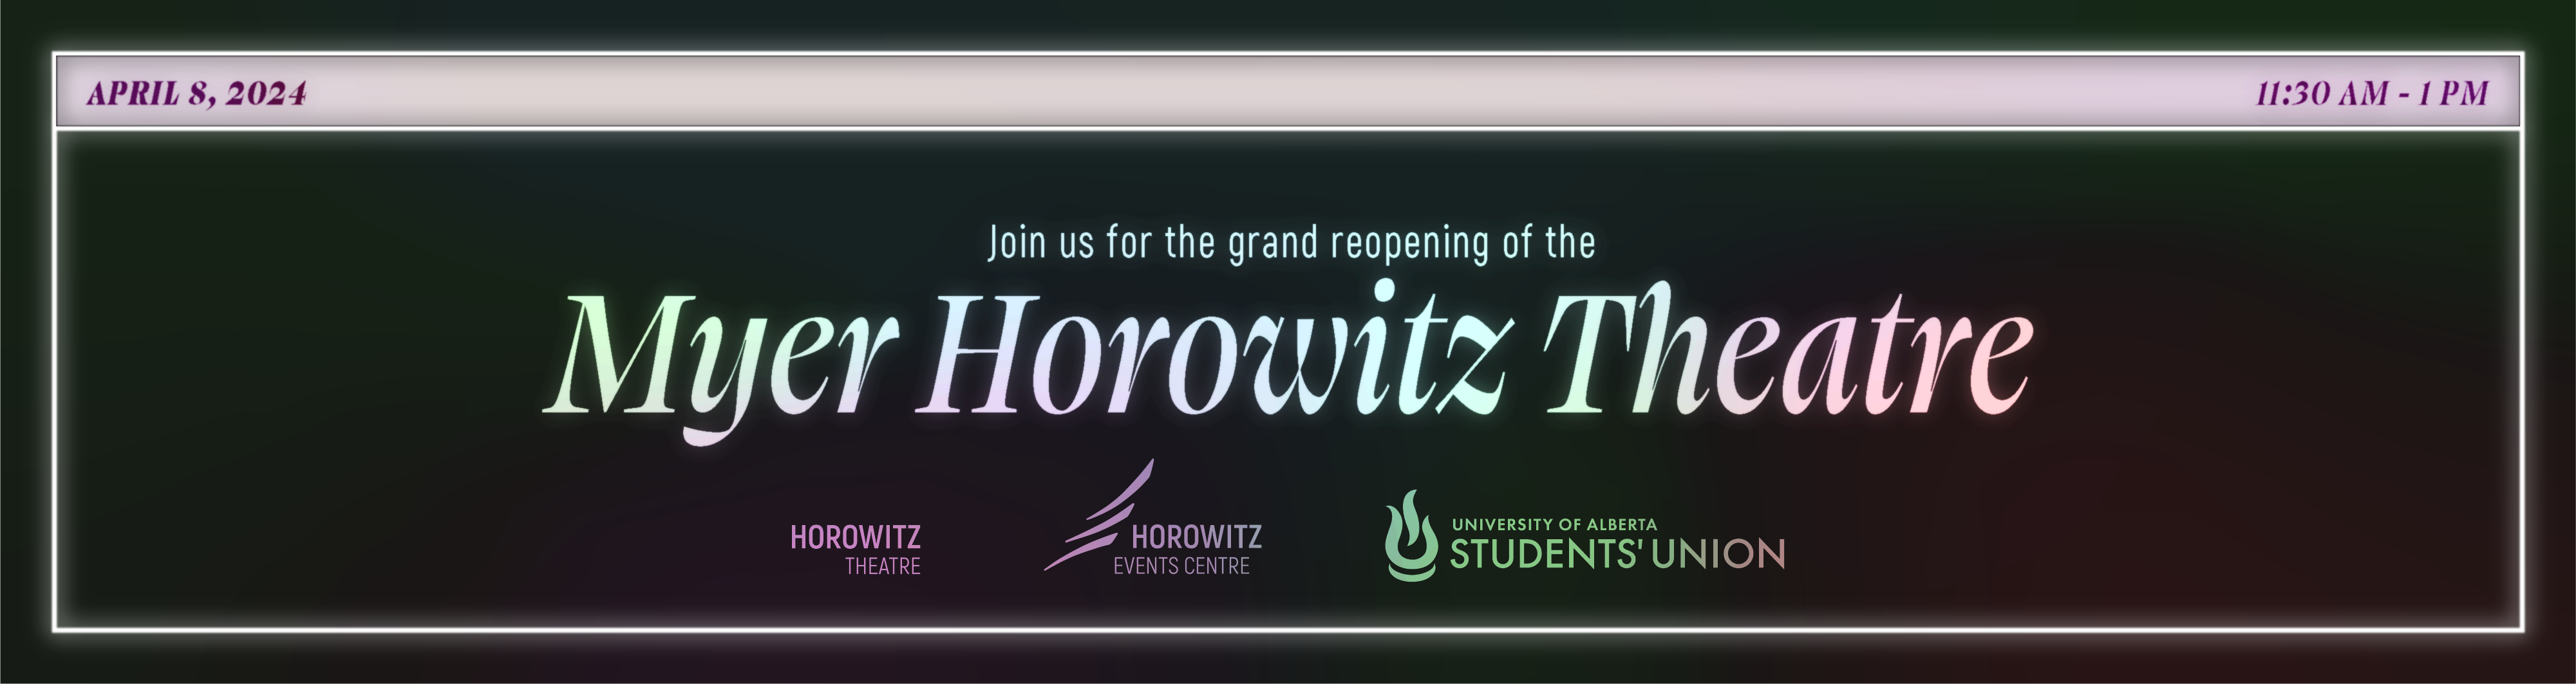 Join us to reopen the Horowitz Theatre